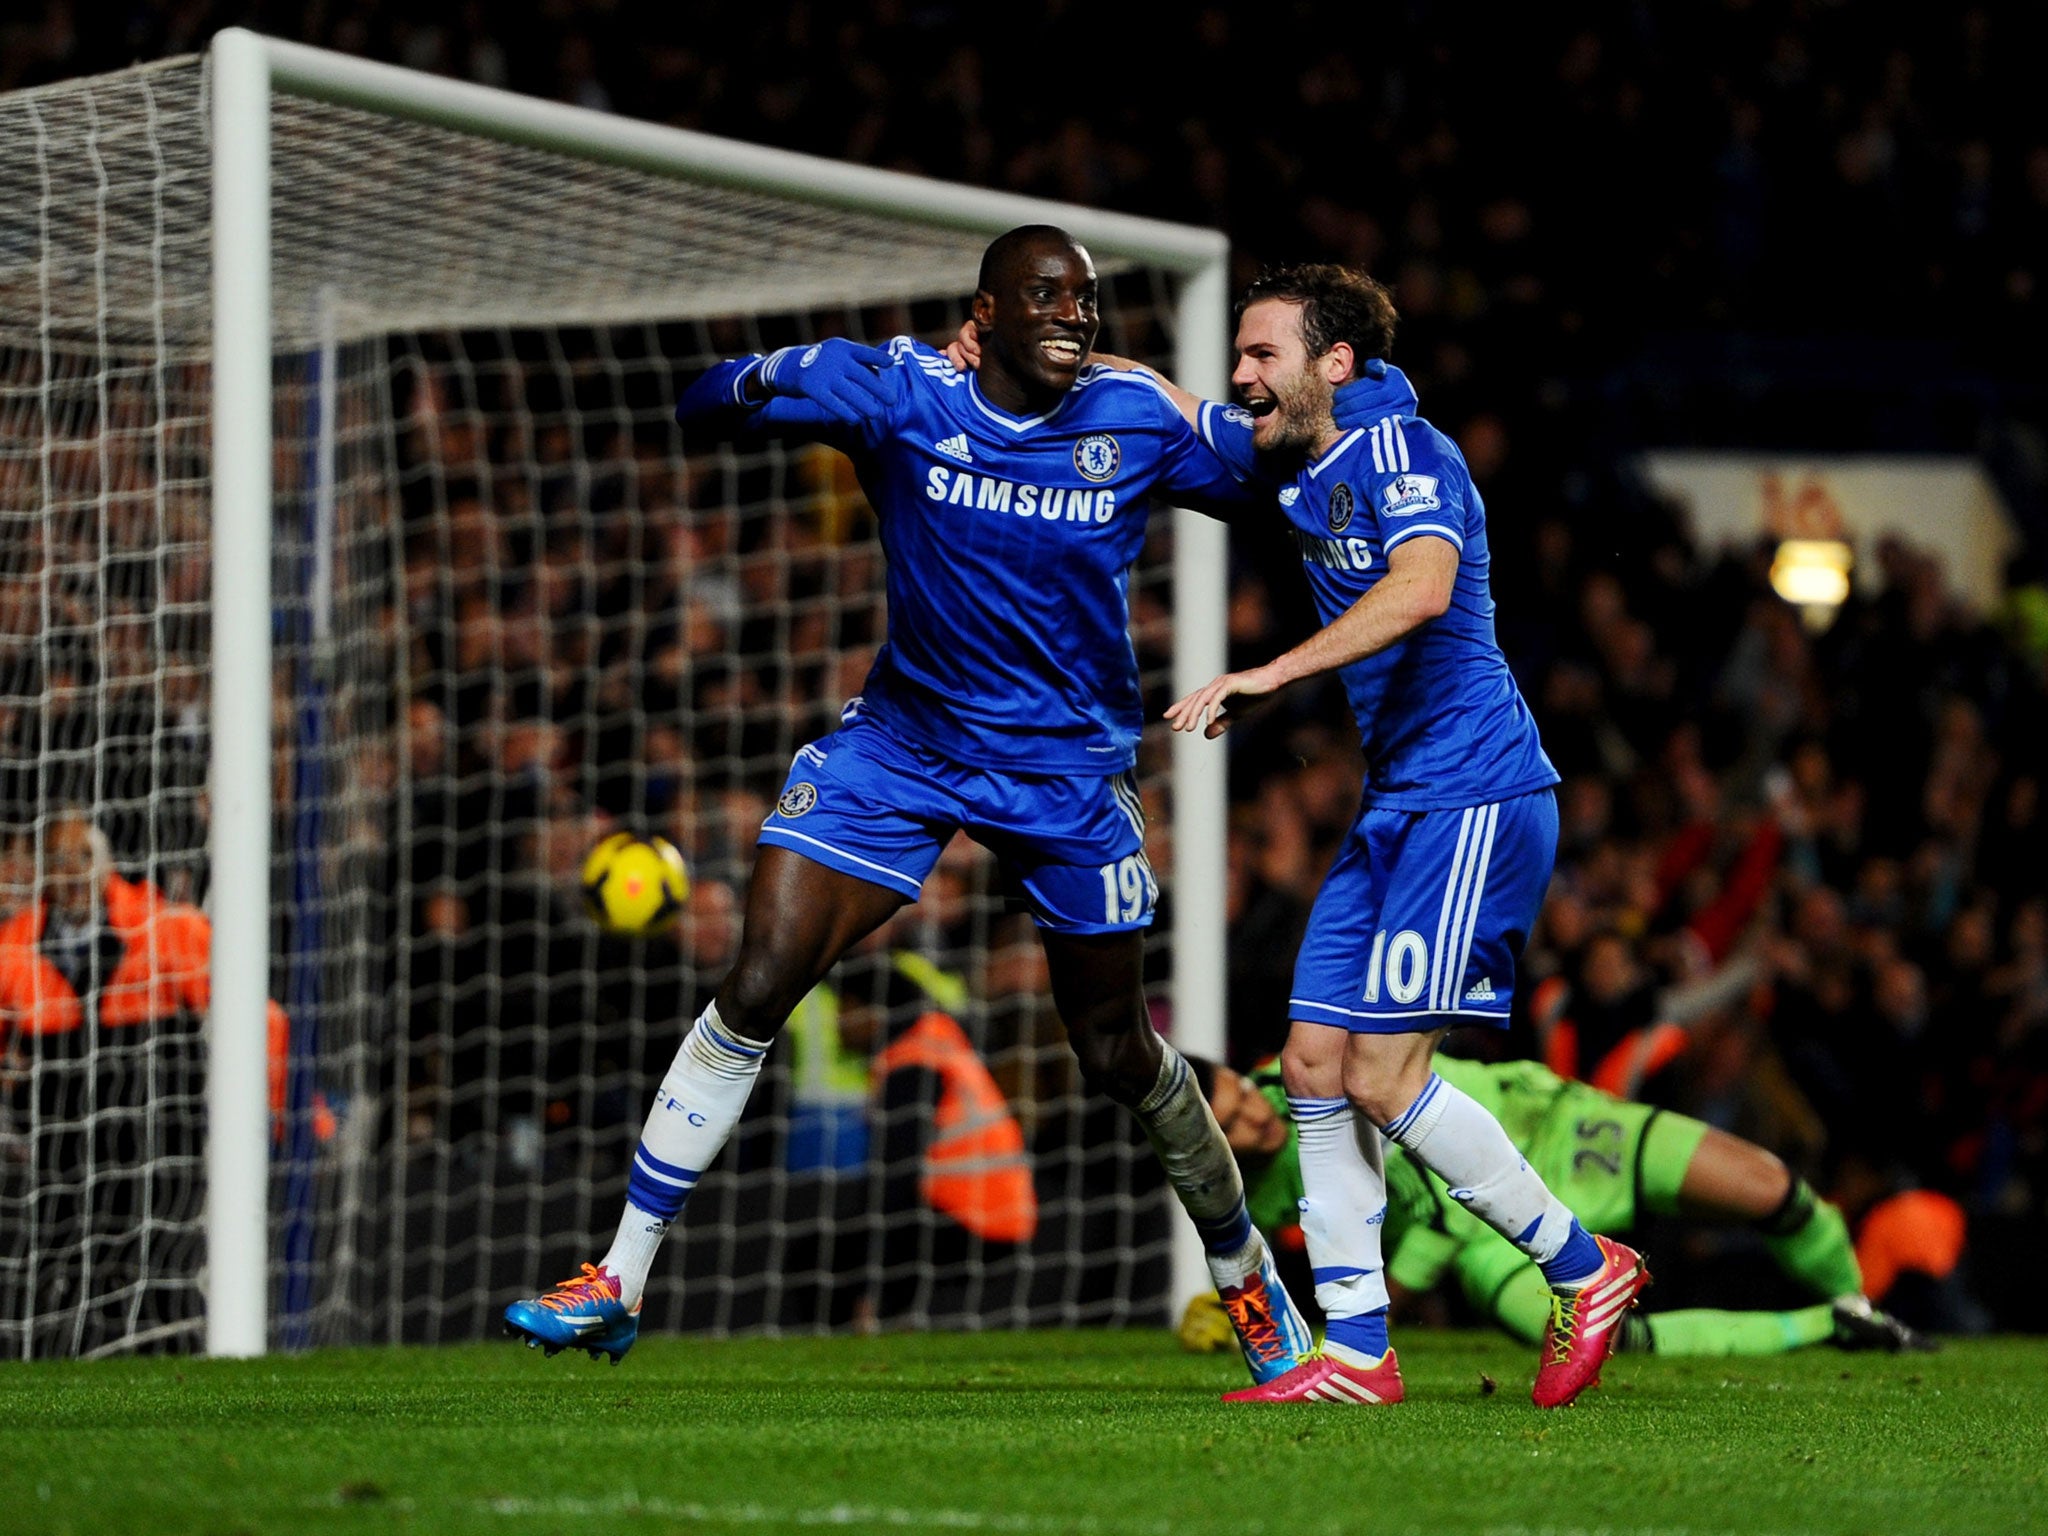 Demba Ba could be set for a move